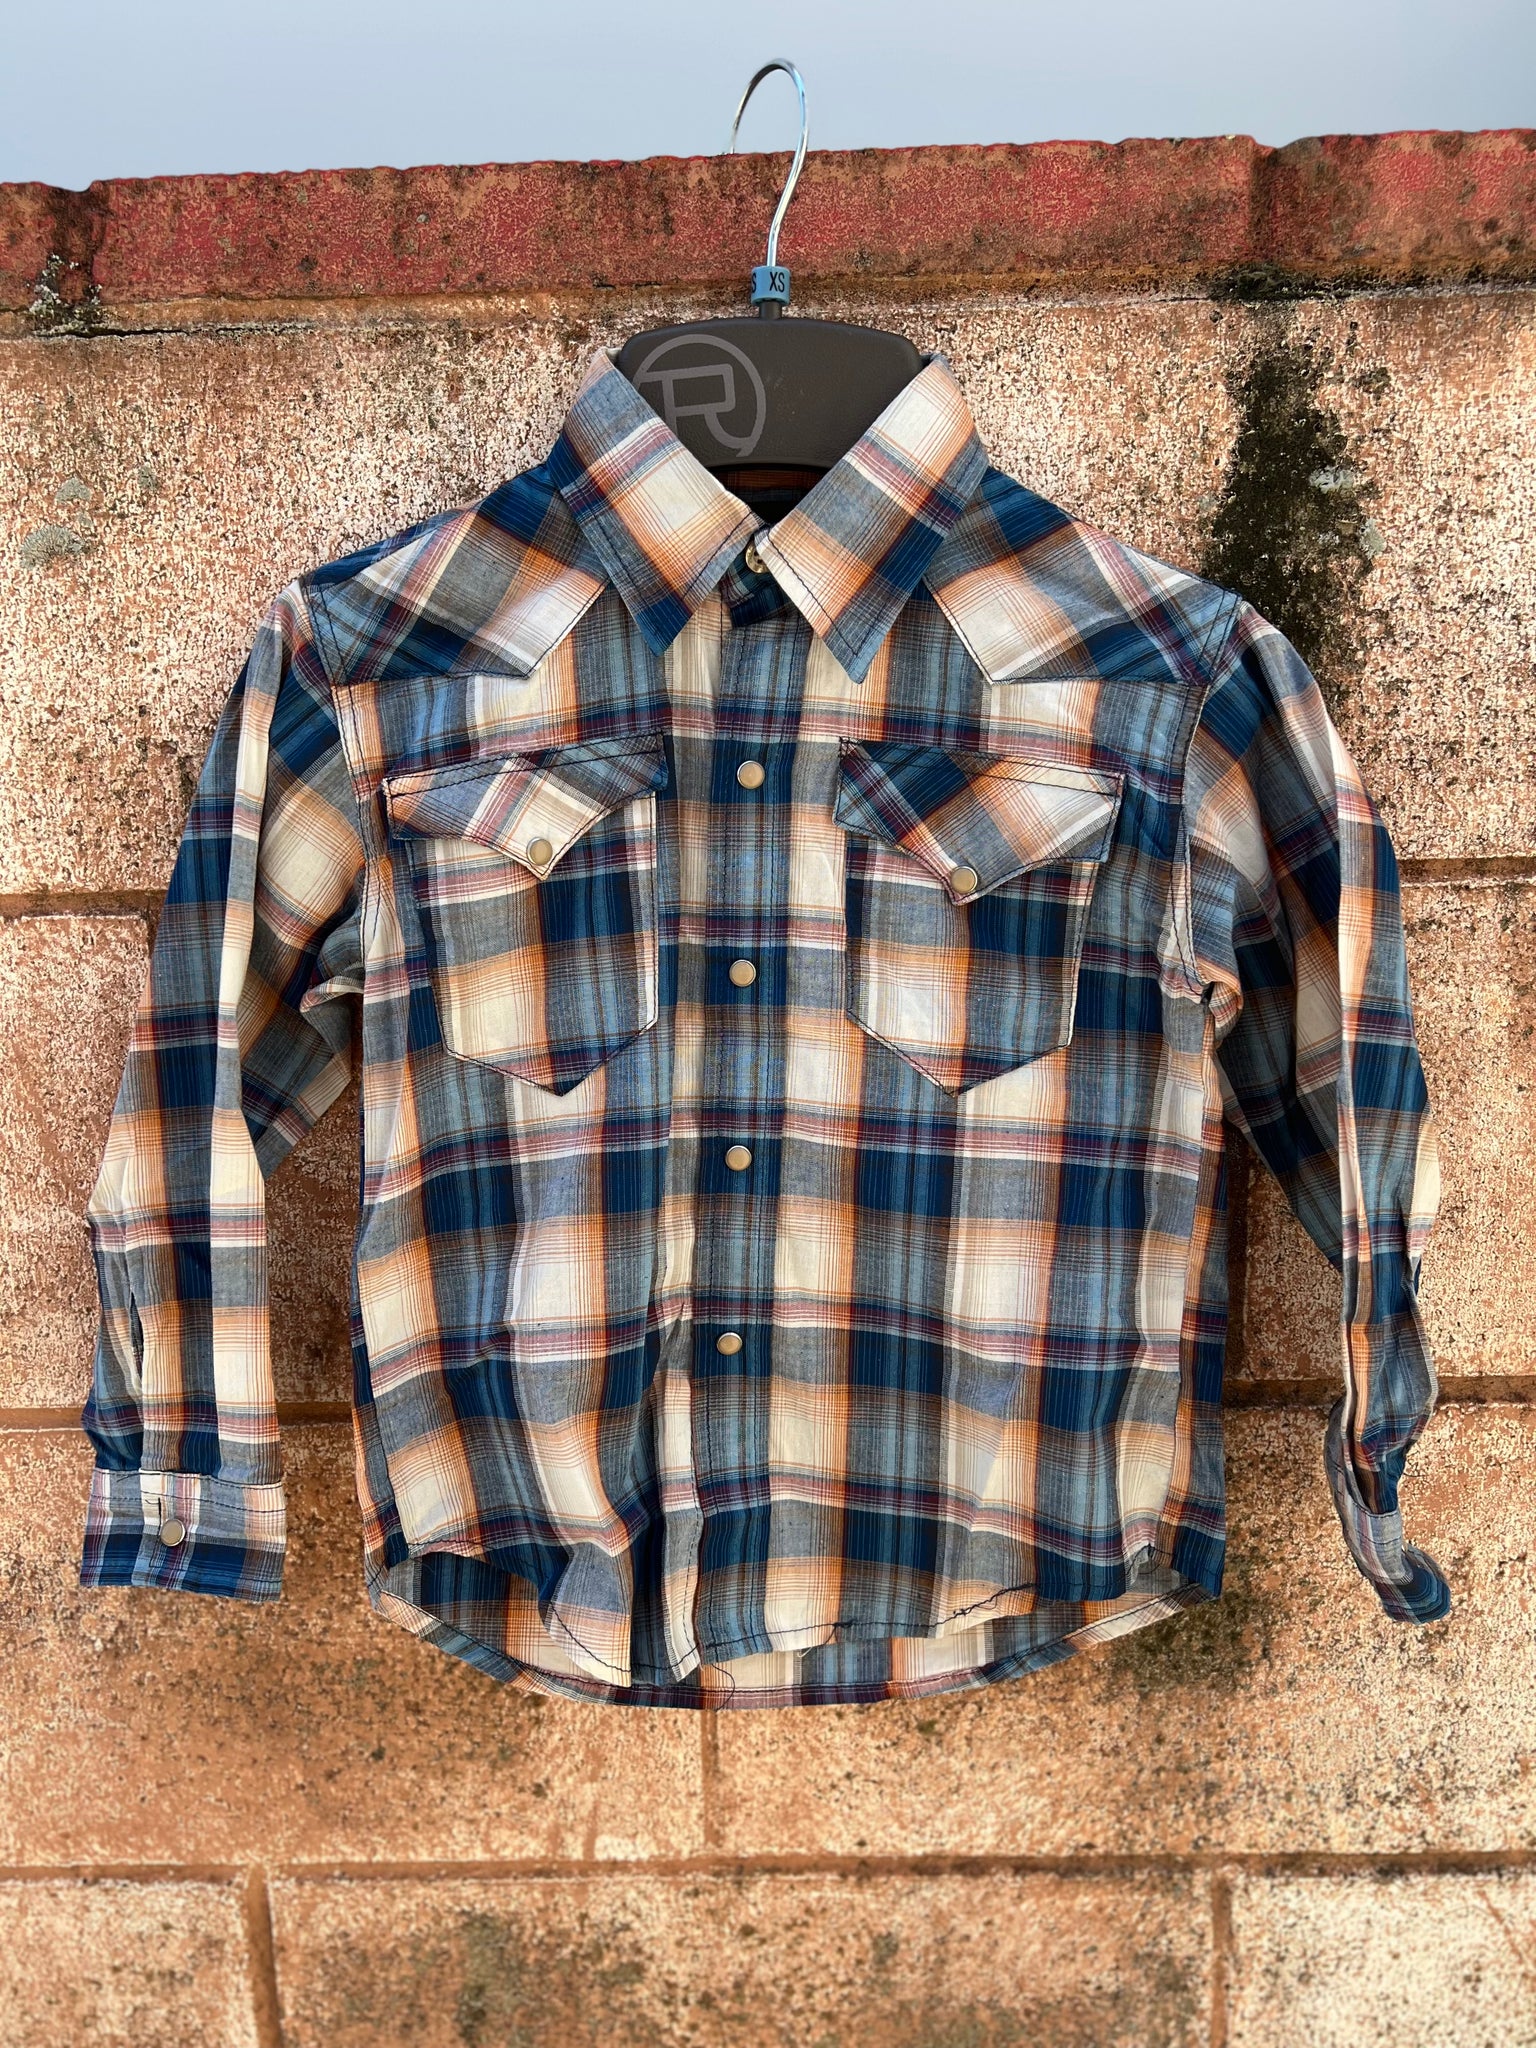 03-030-0062-0754 Roper Boys West Made Collection L/S Shirt Plaid Blue